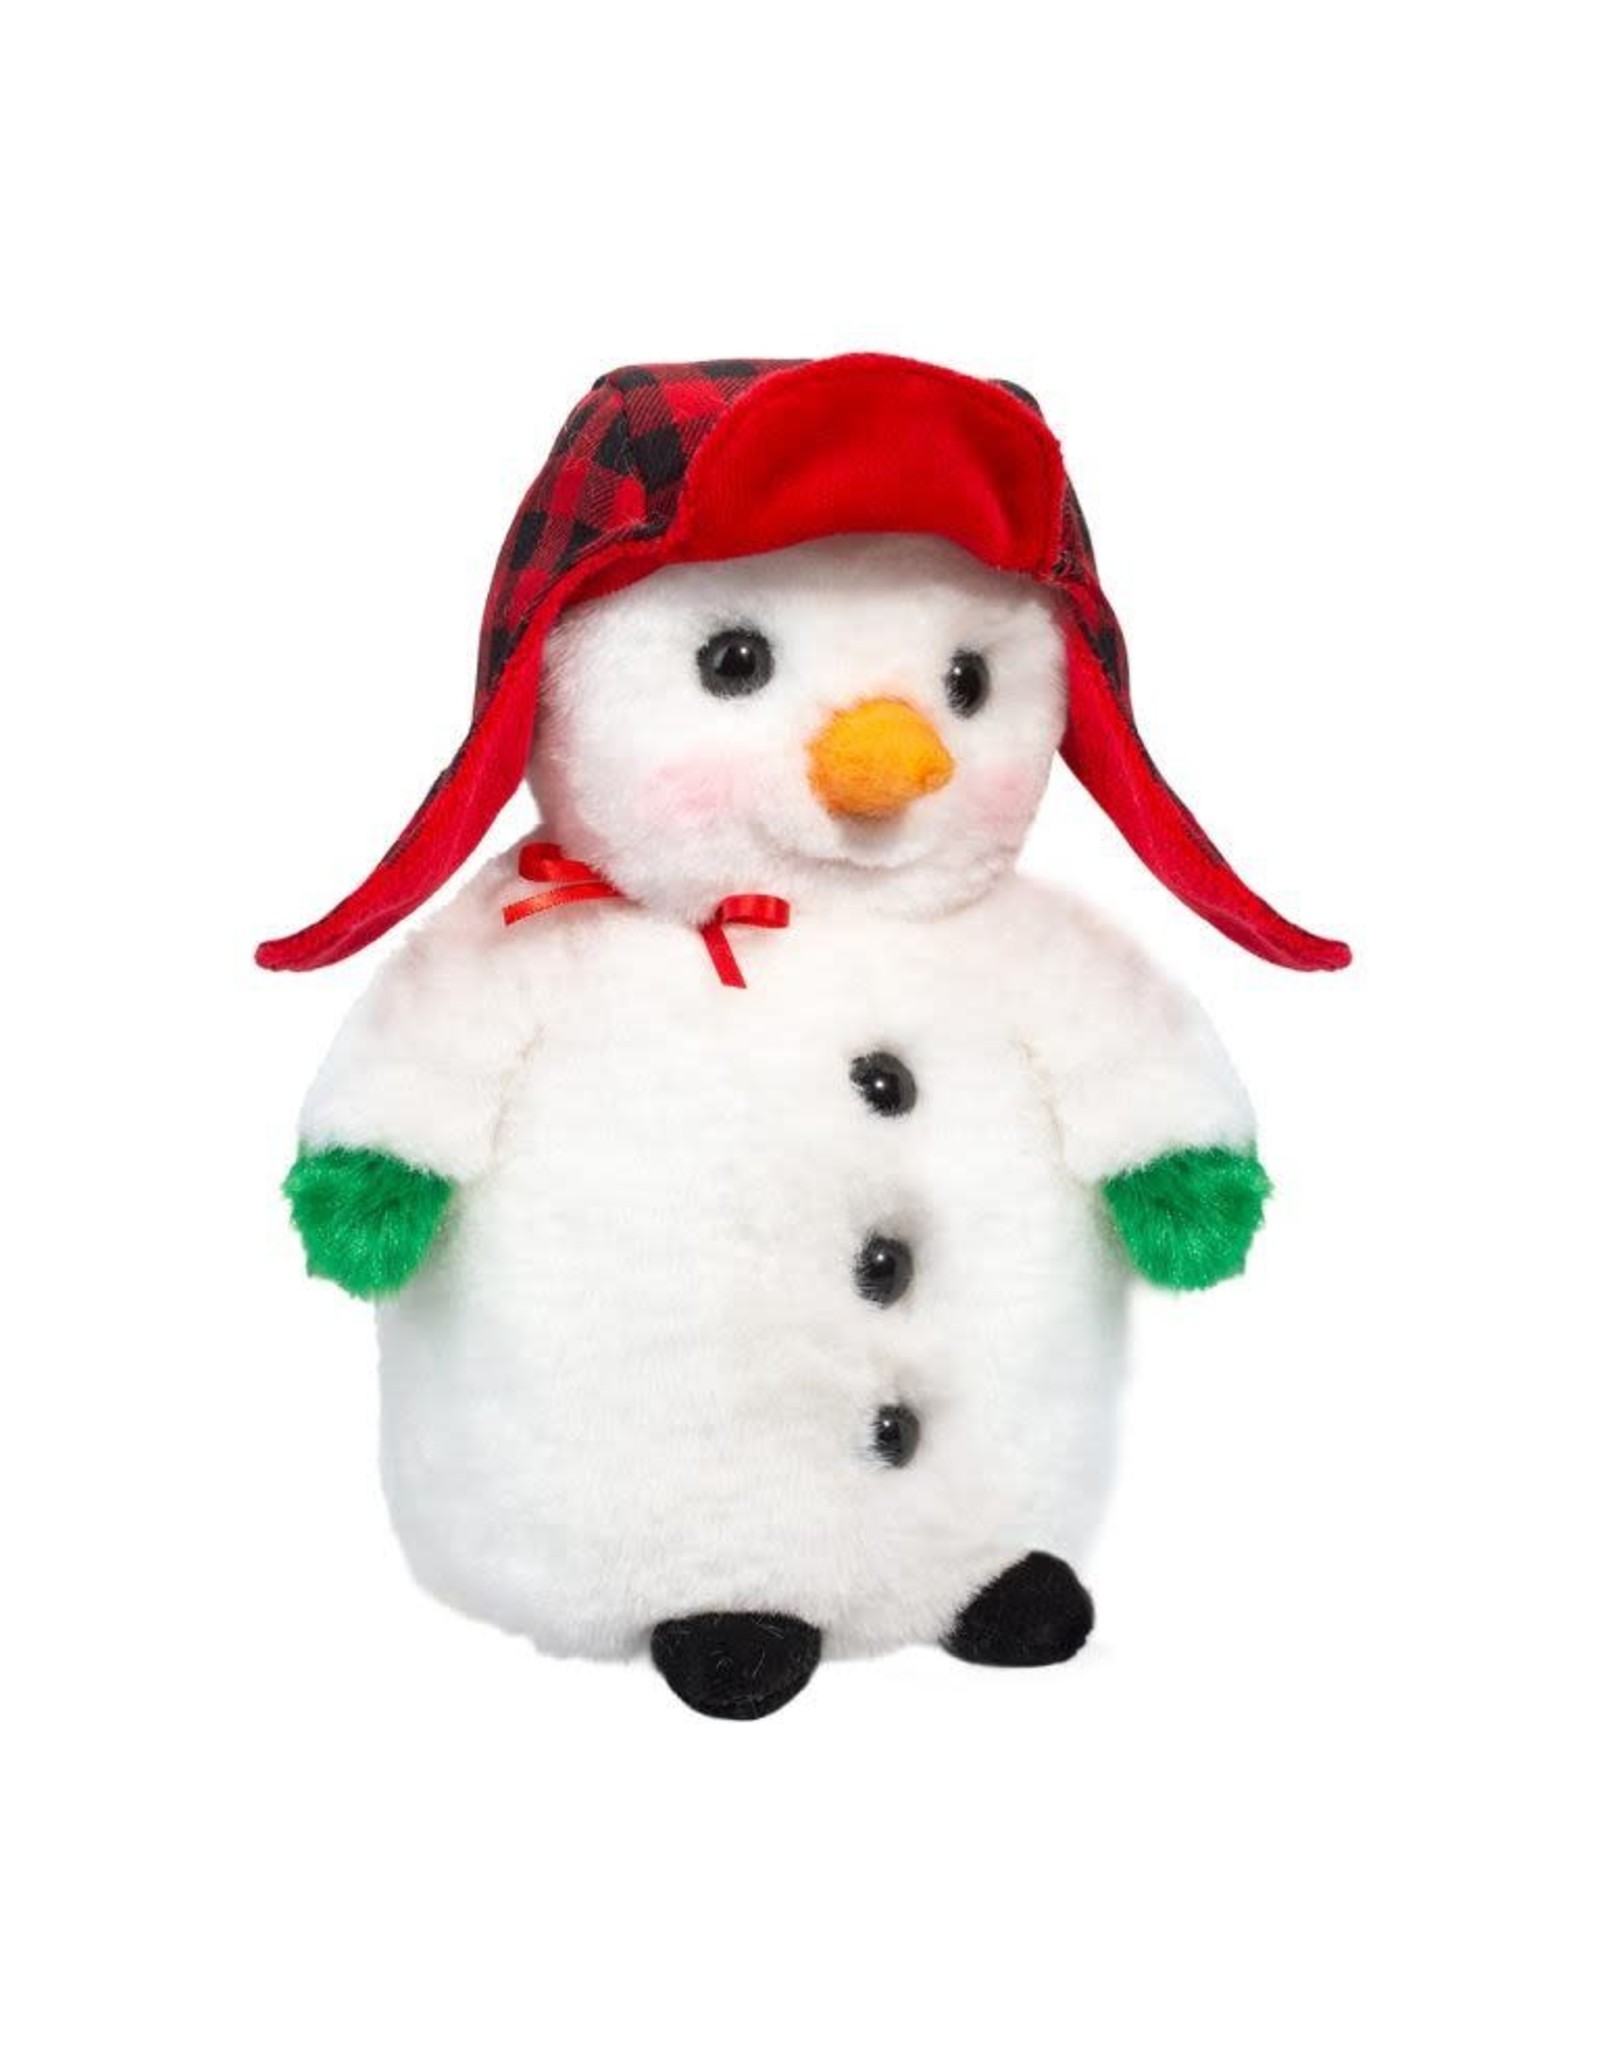 8" Melty Snowman with Bomber Hat